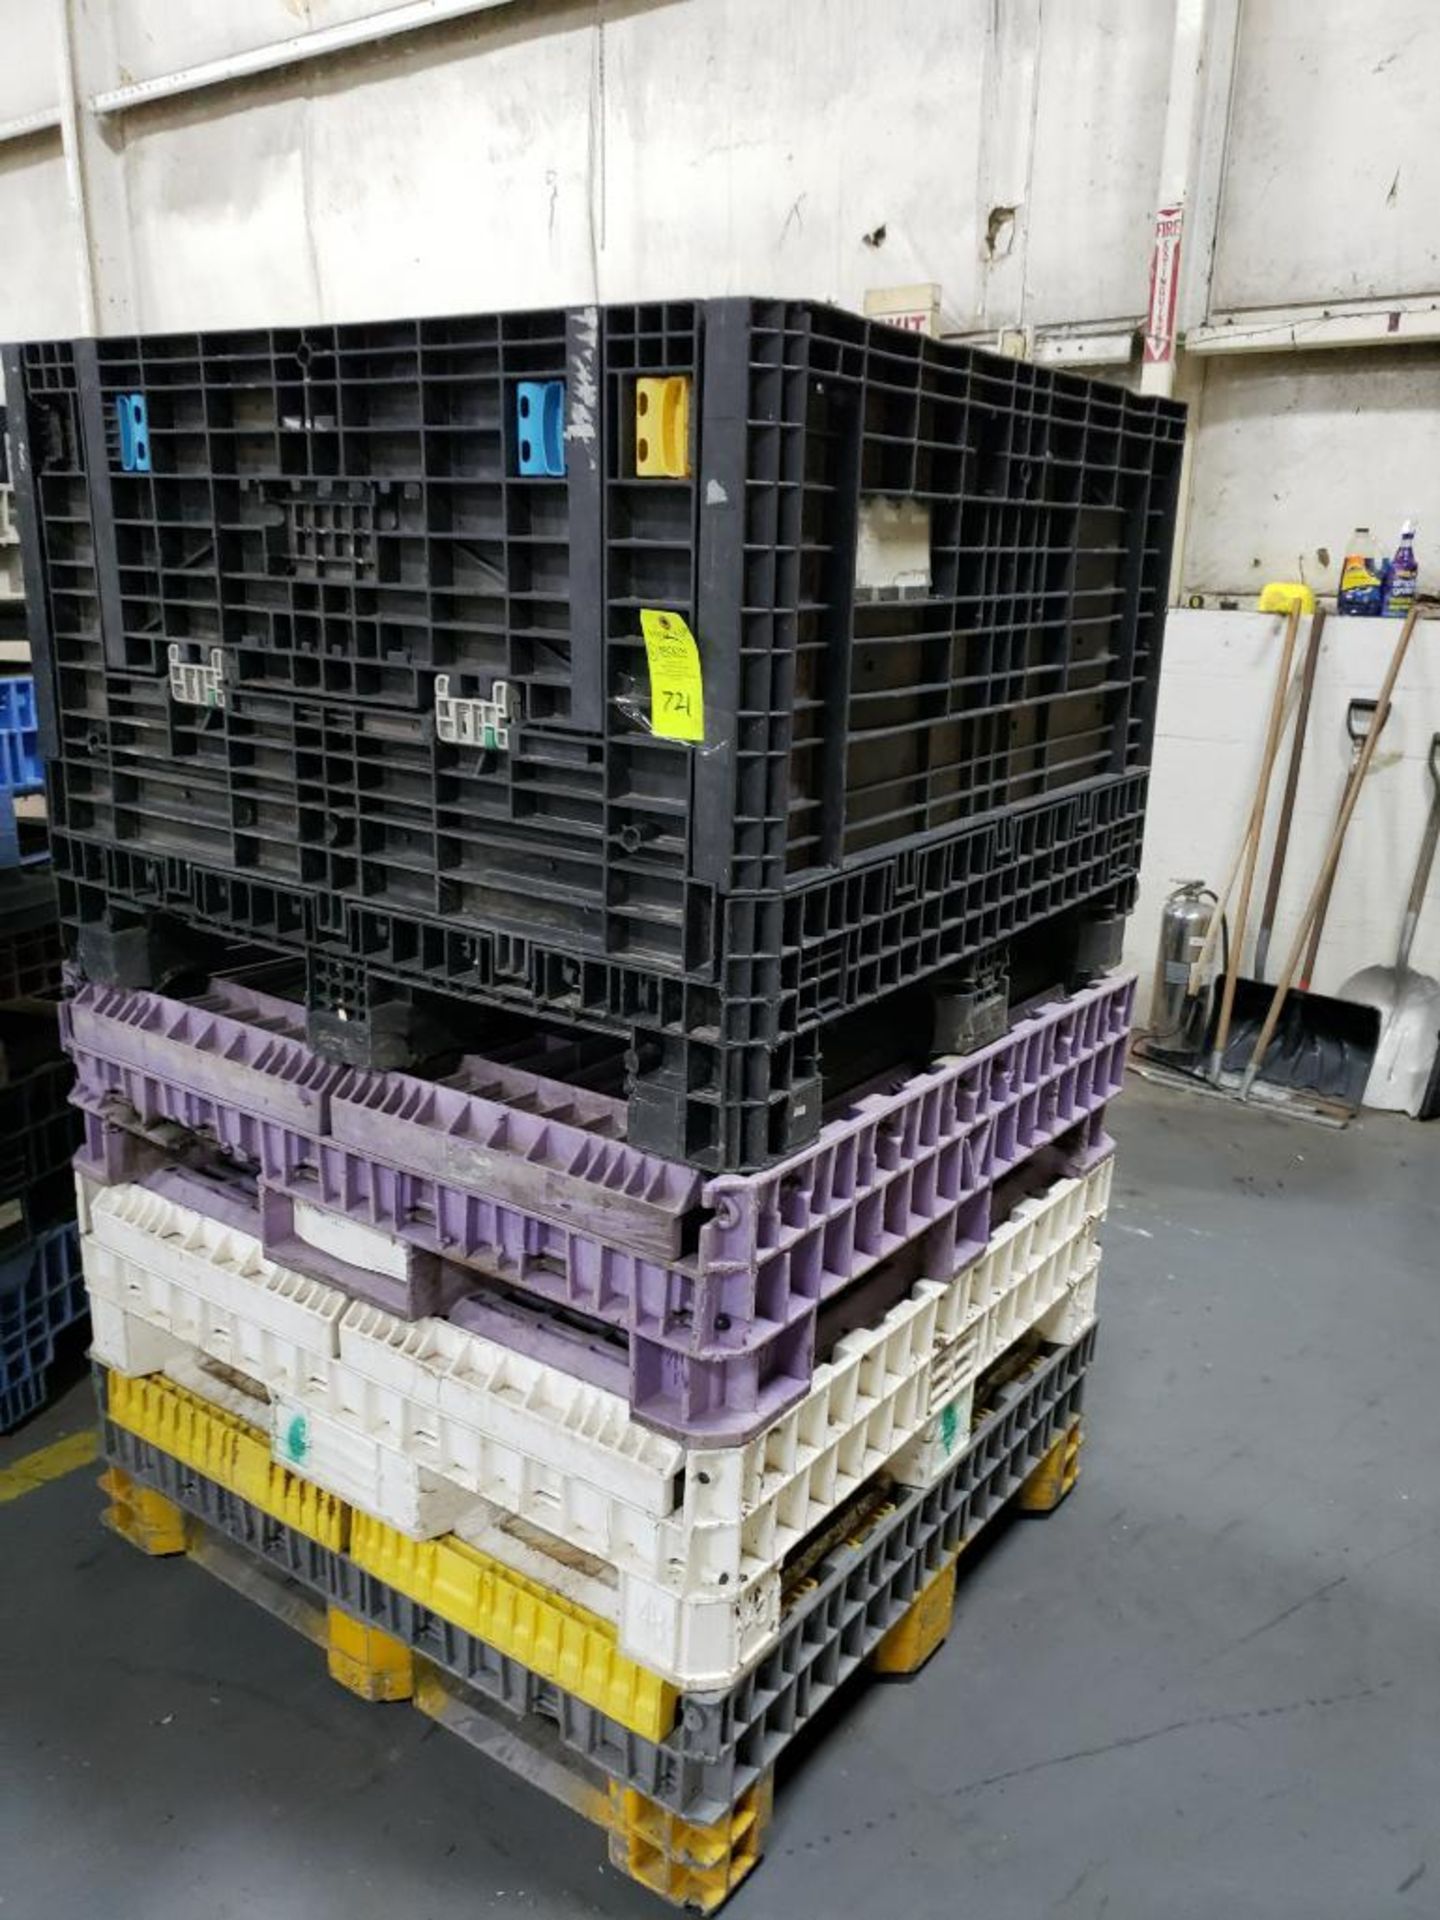 Qty 4 - Drop down gaylord containers. 48in x 46in. Heights may vary slightly. - Image 2 of 5